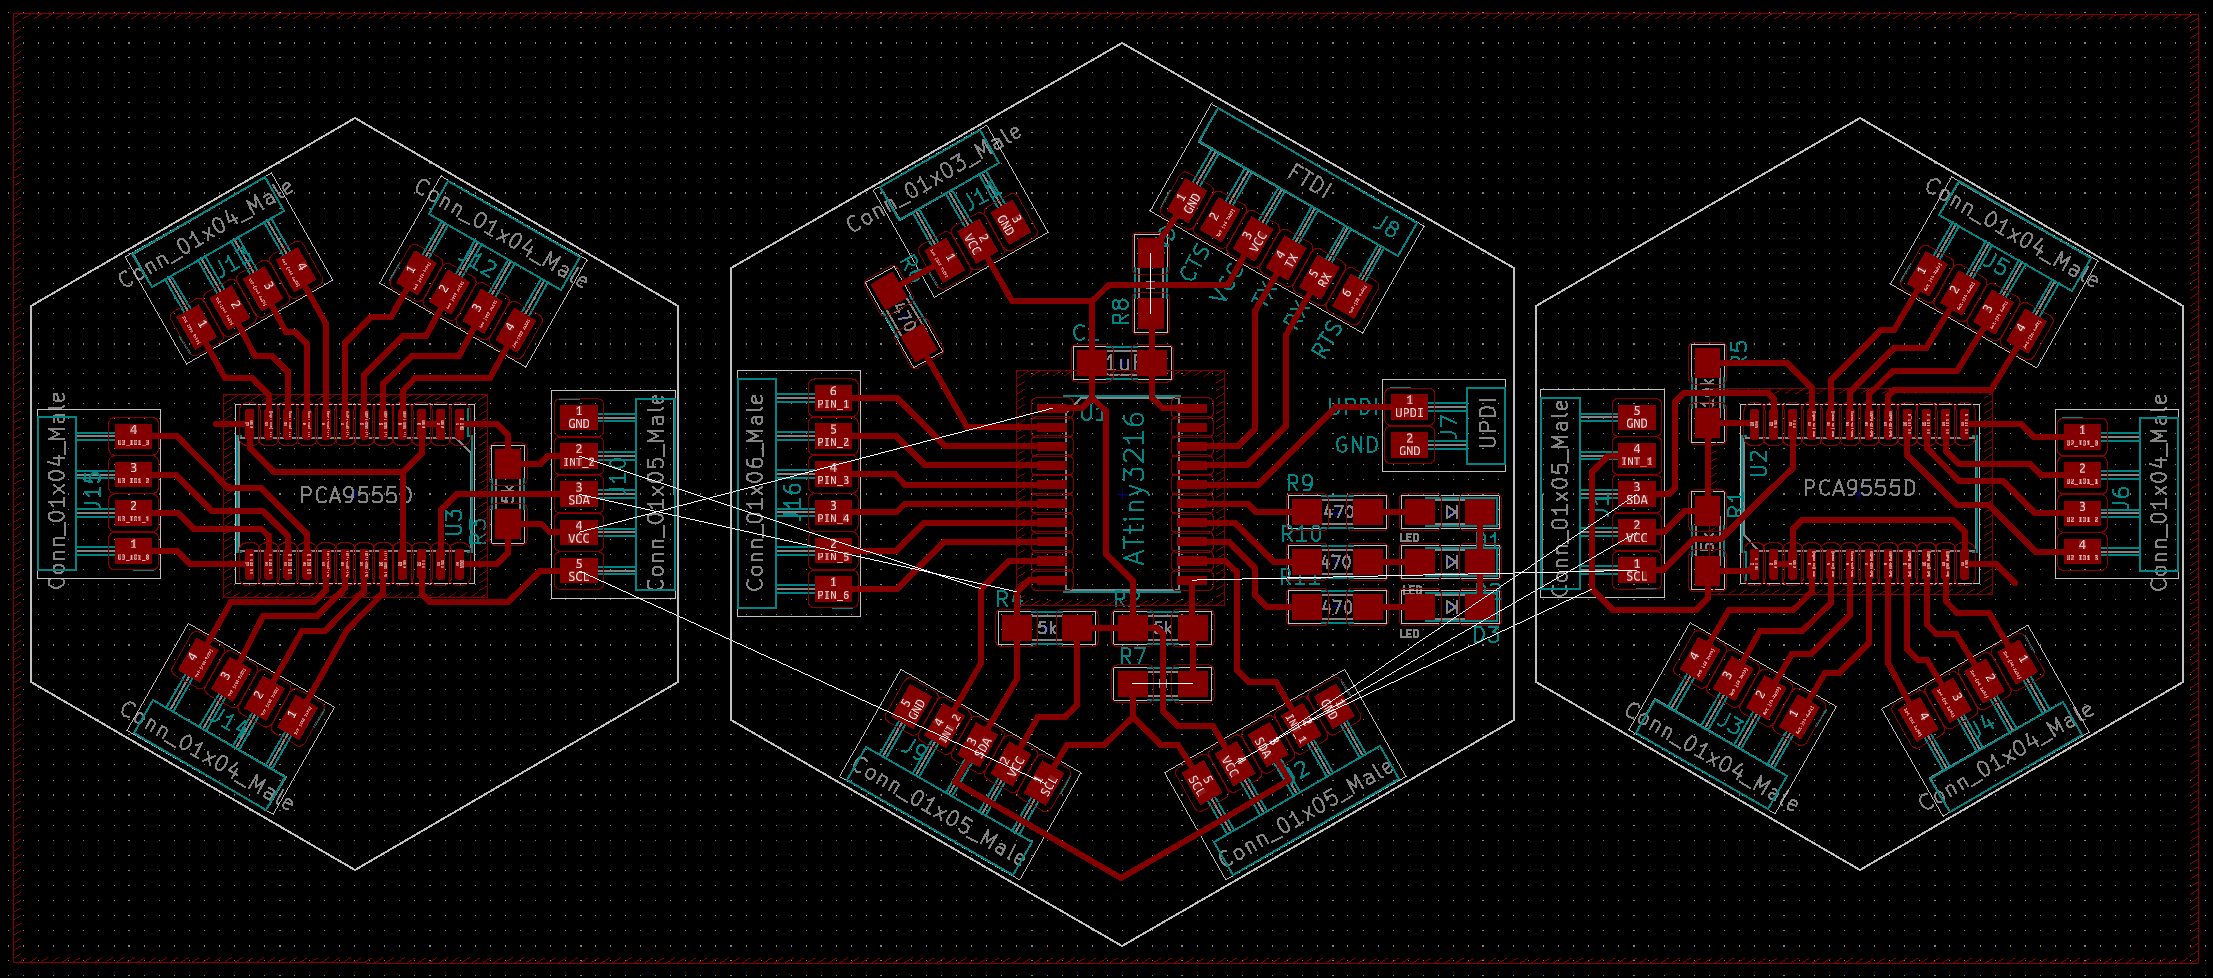 Final PCB layout in KiCad